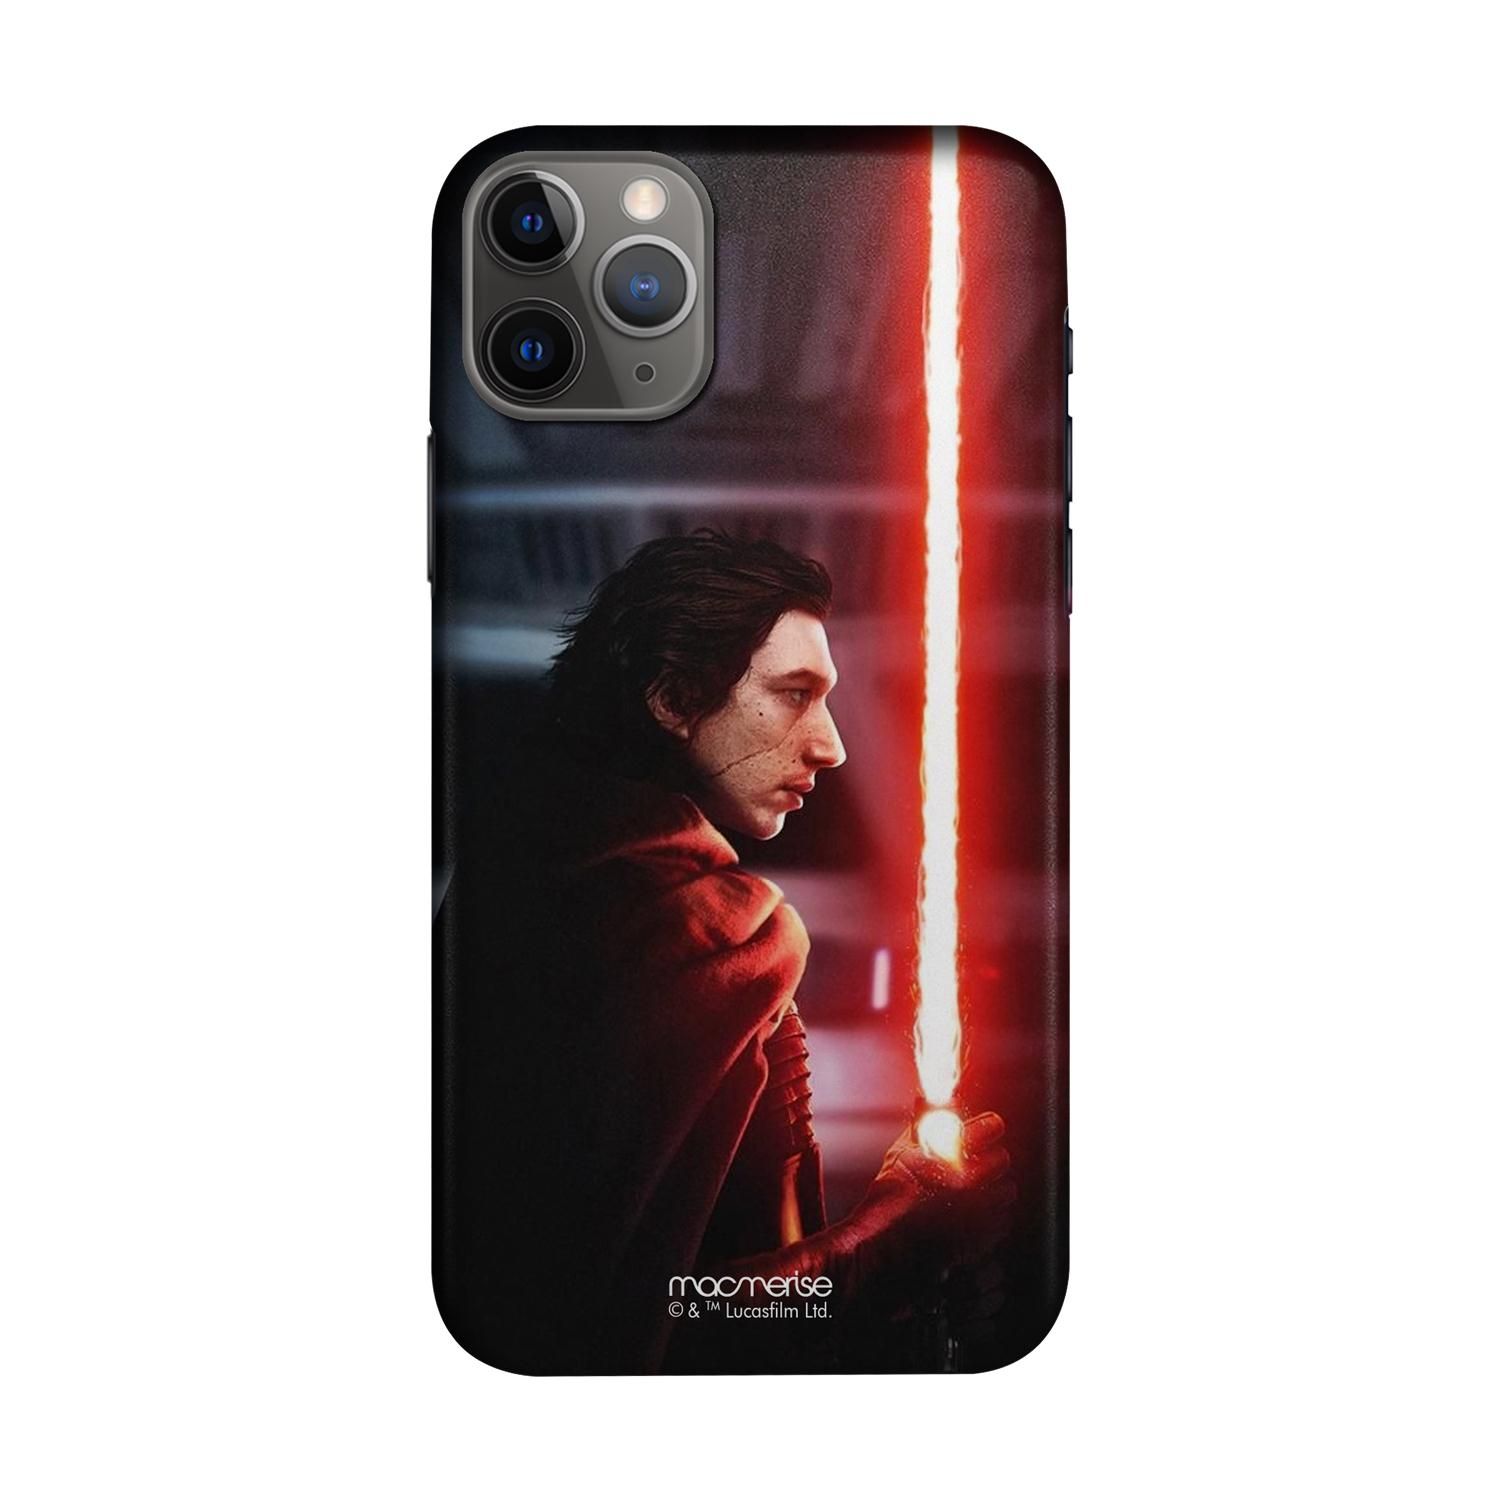 Buy Light Saber Red - Sleek Phone Case for iPhone 11 Pro Max Online